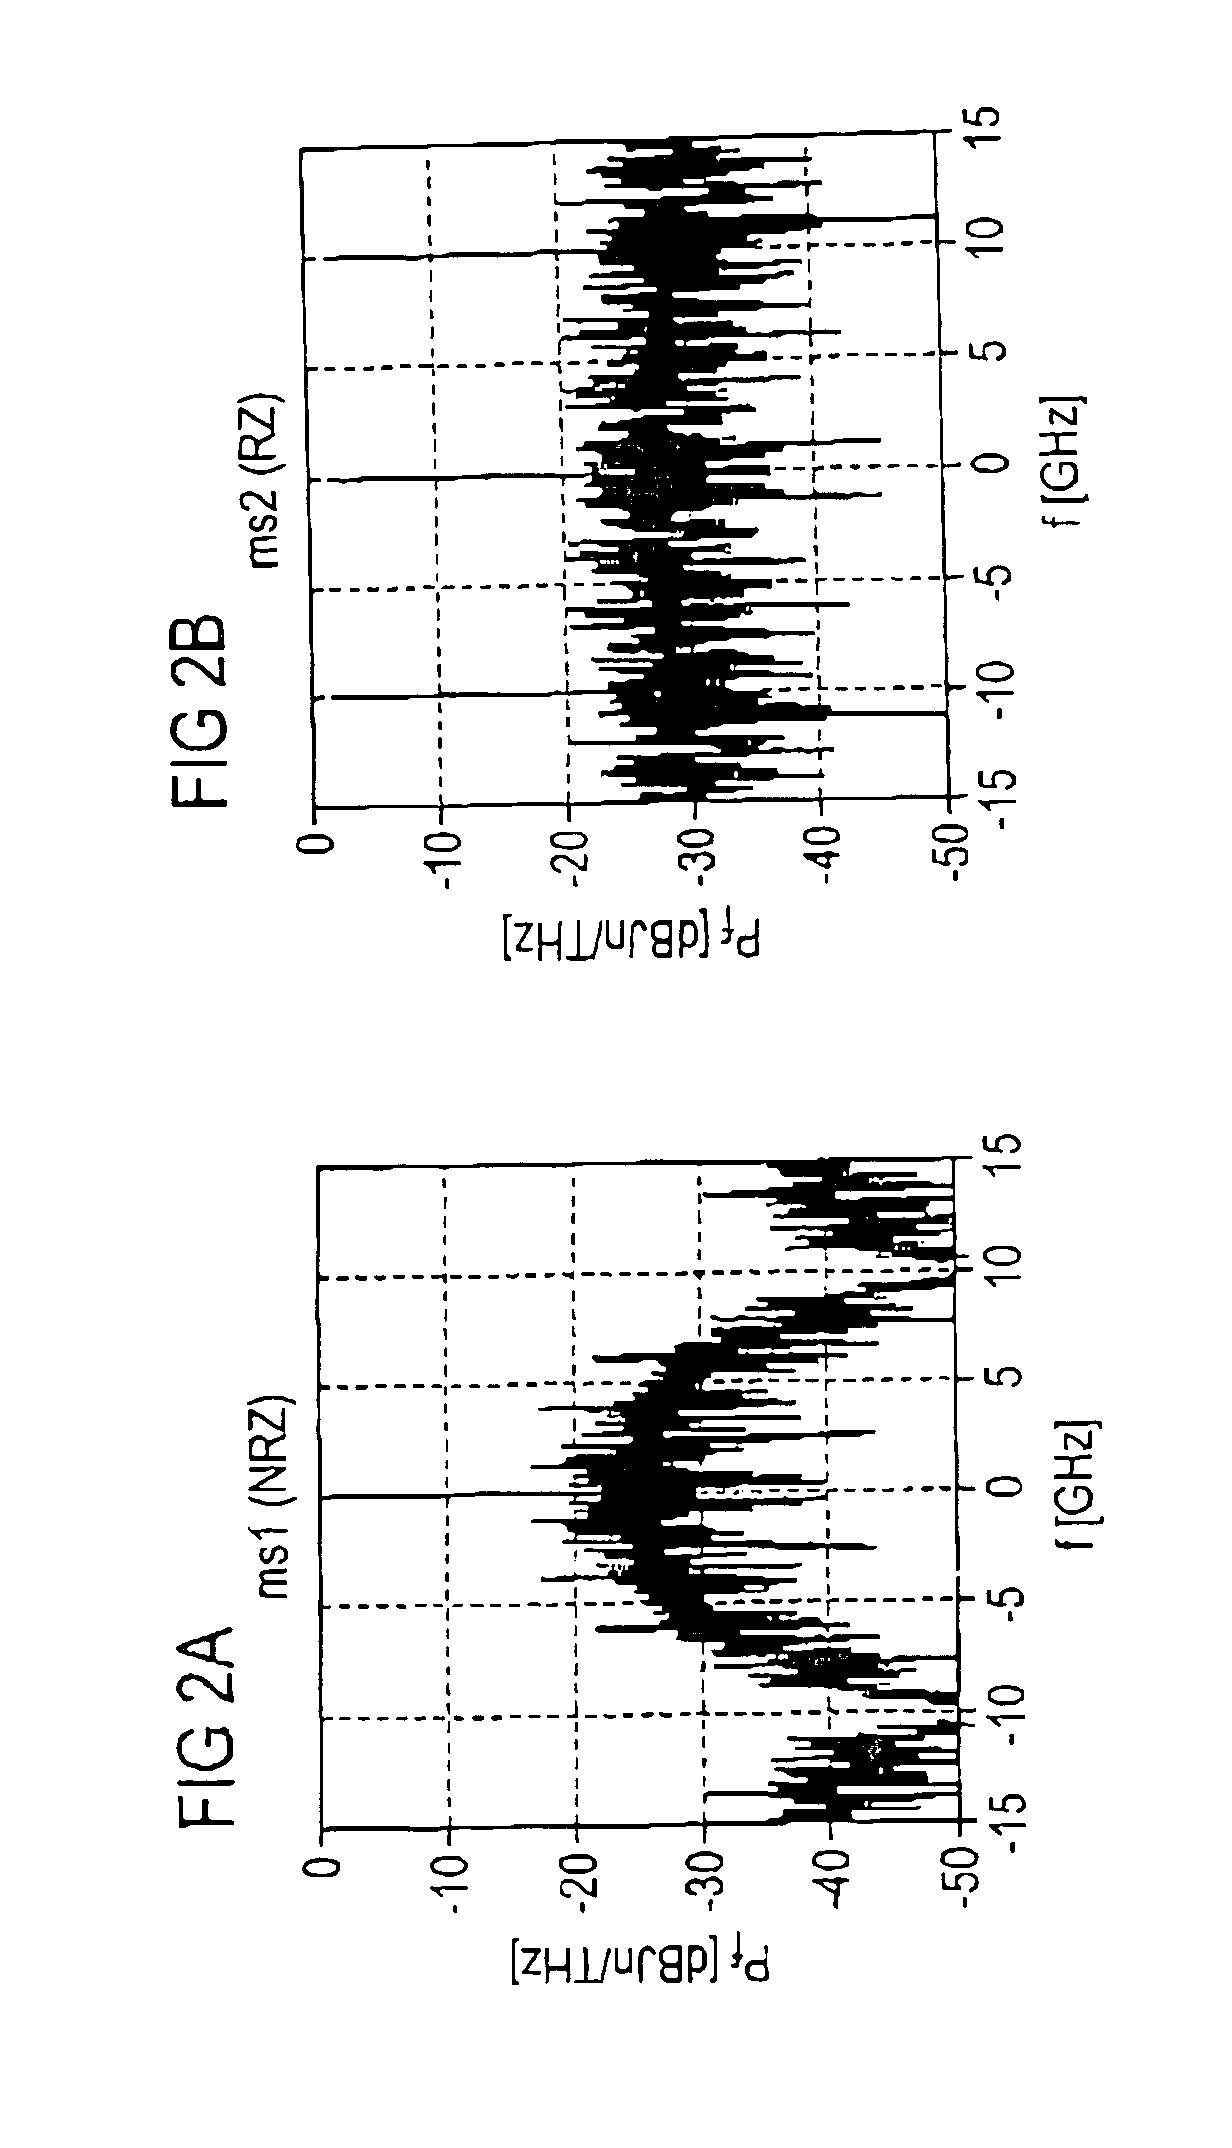 Method for transmitting at least one first and one second data signal in polarization division multiplex in an optical transmission system